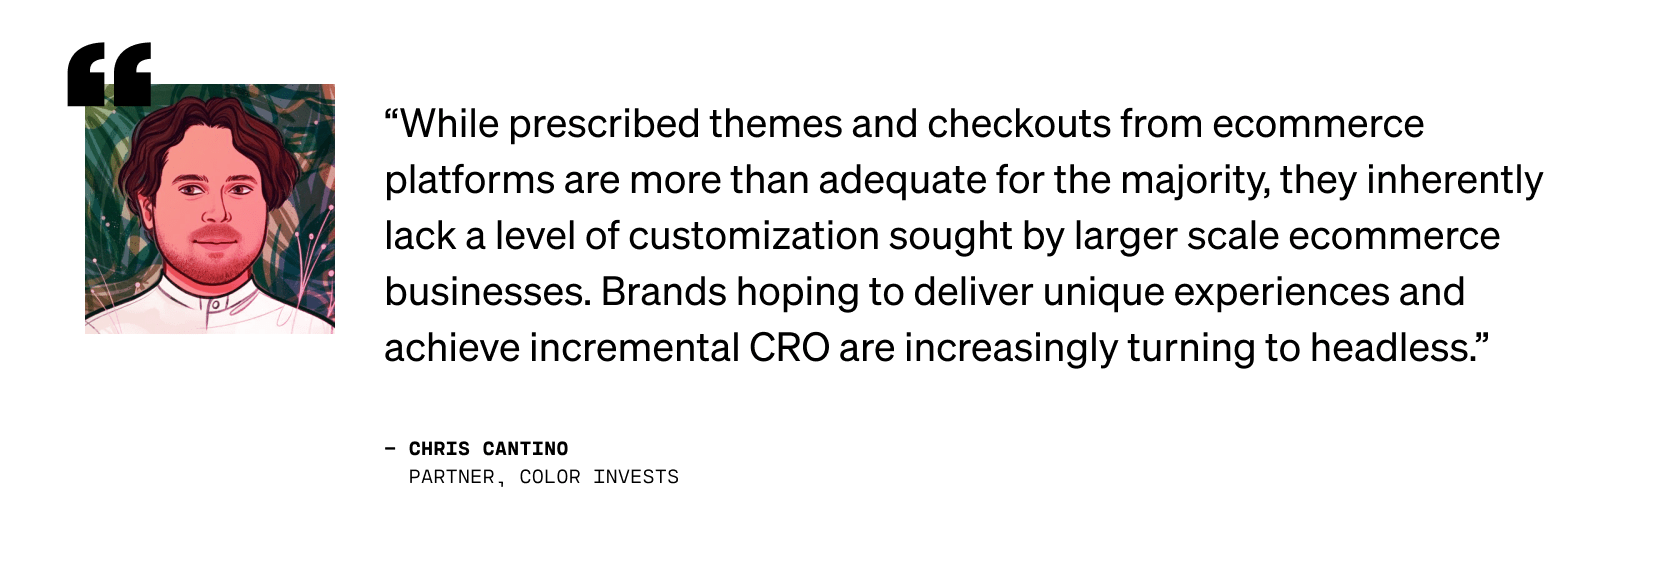 Quote from Chris Cantino, Partner at Color Invests